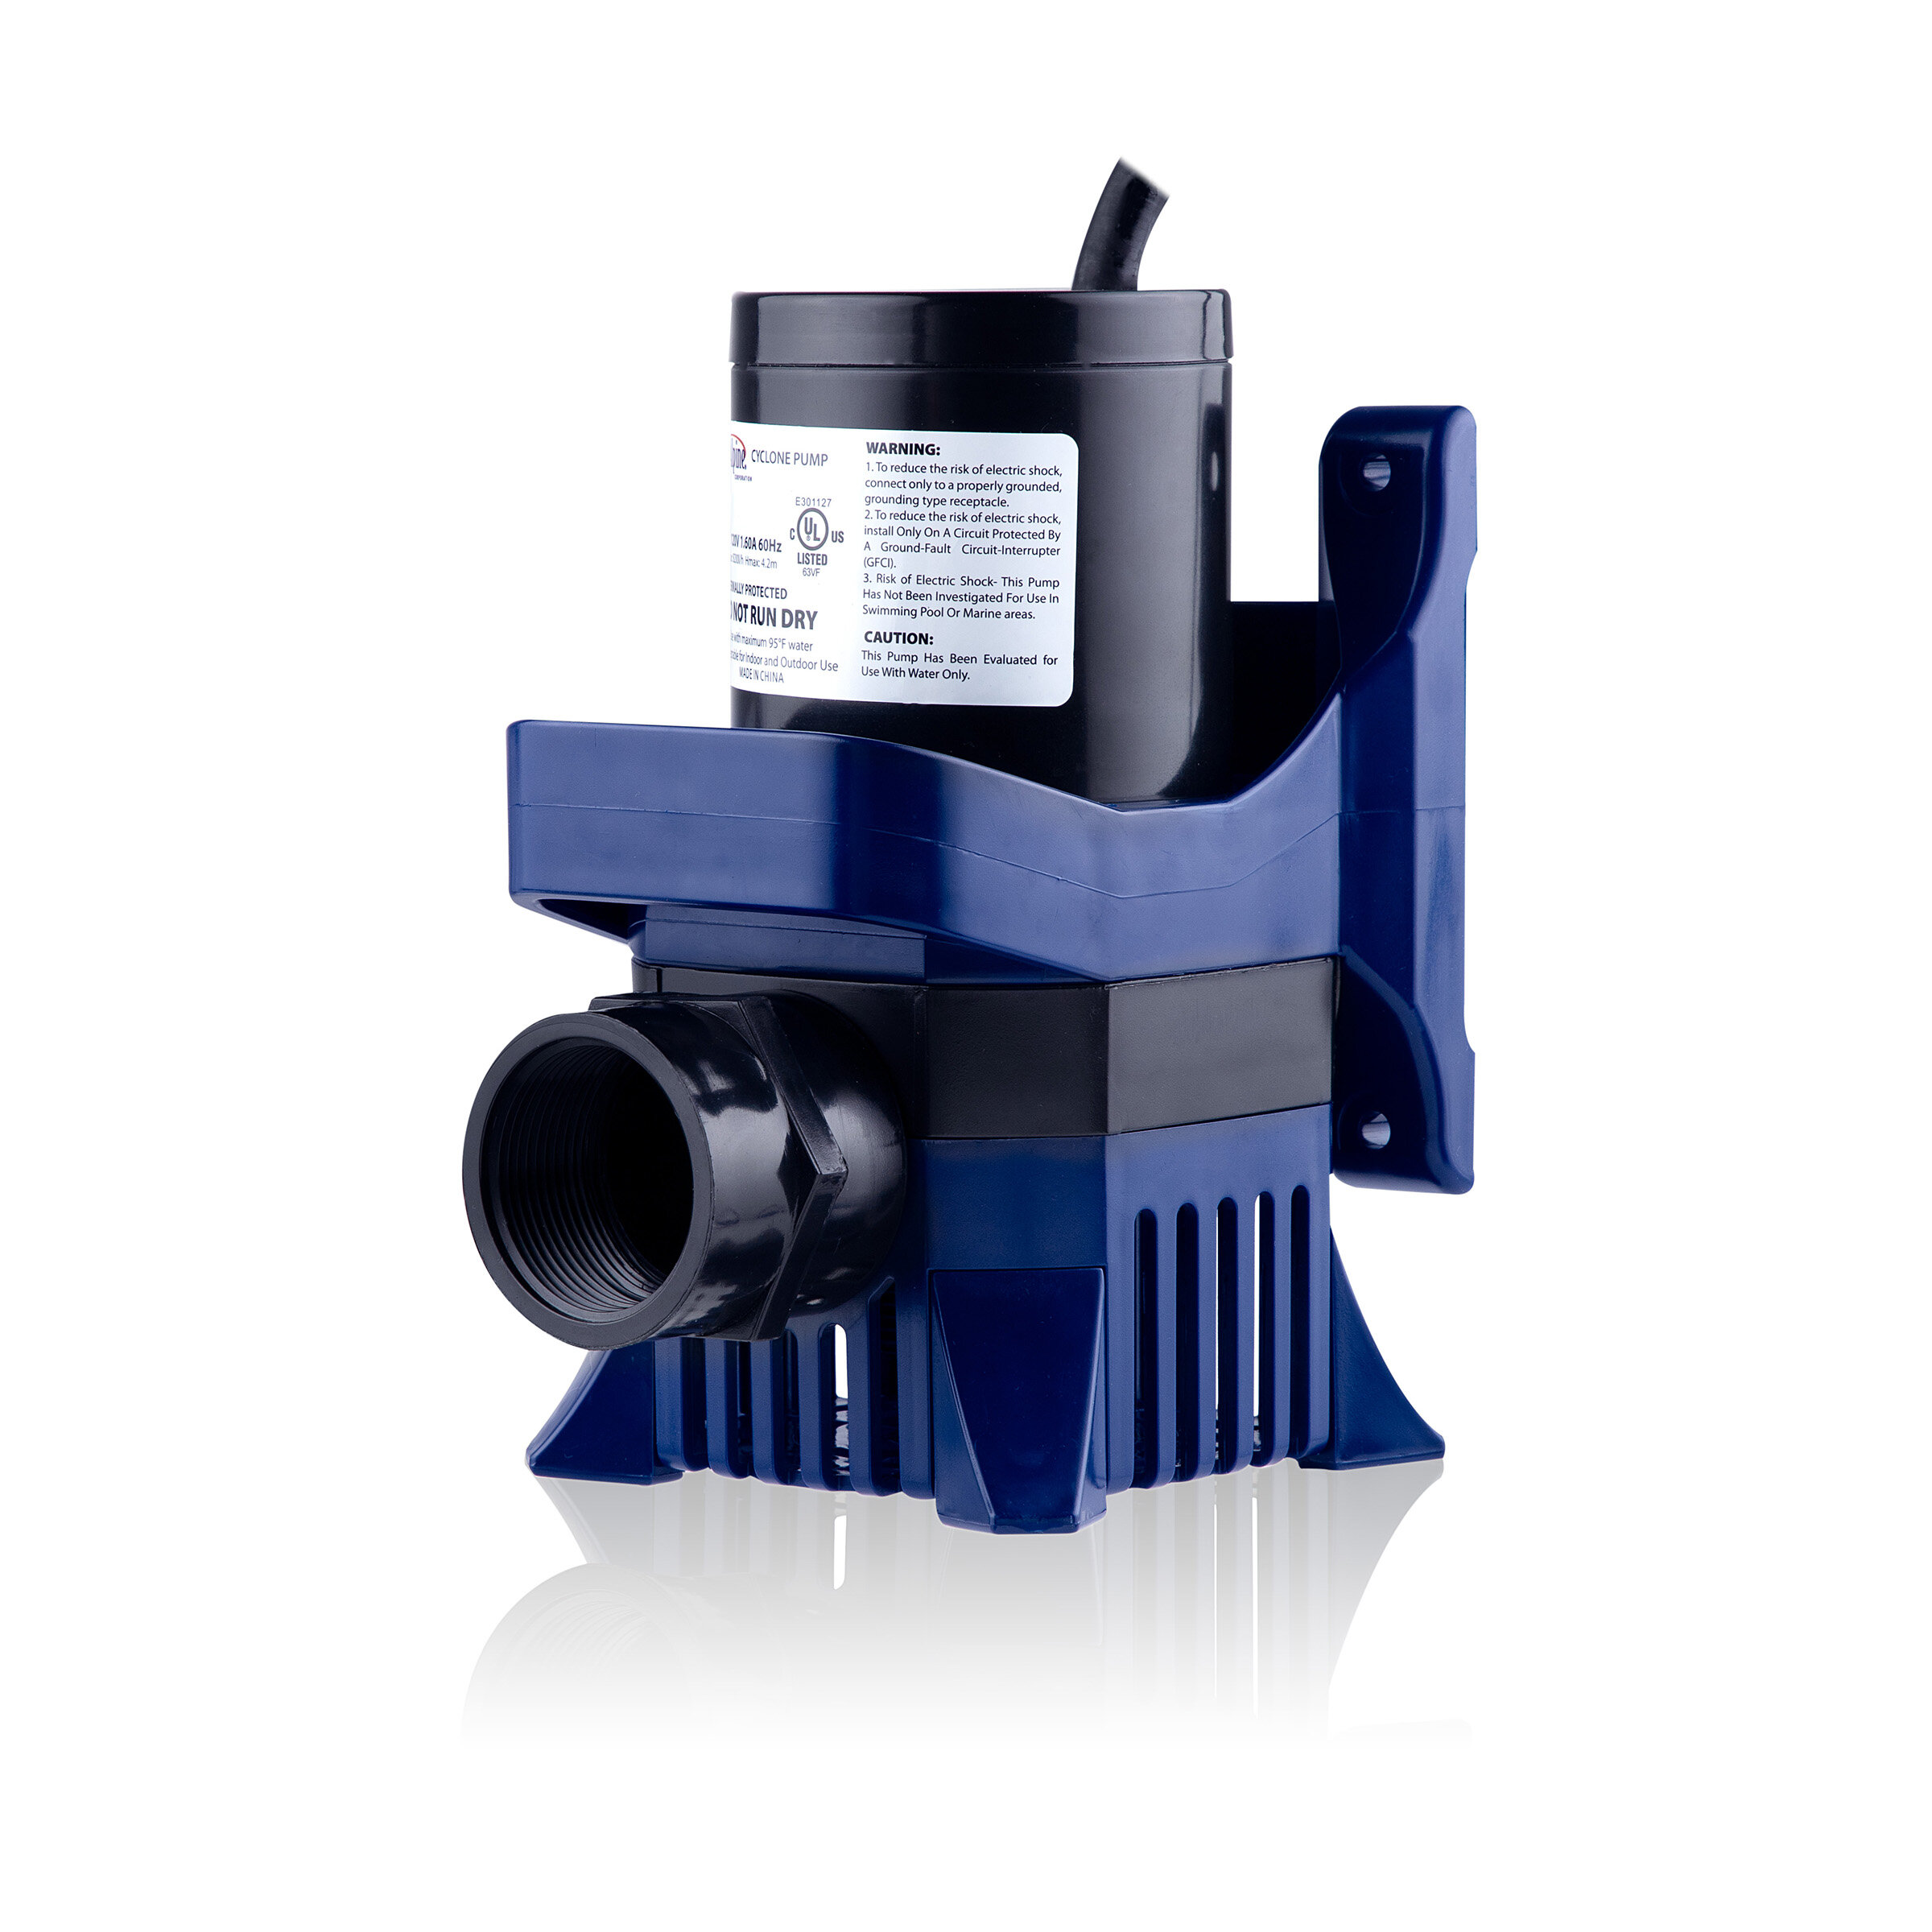 Capps Cyclone Pump Arlmont & Co. Wattage: 306W